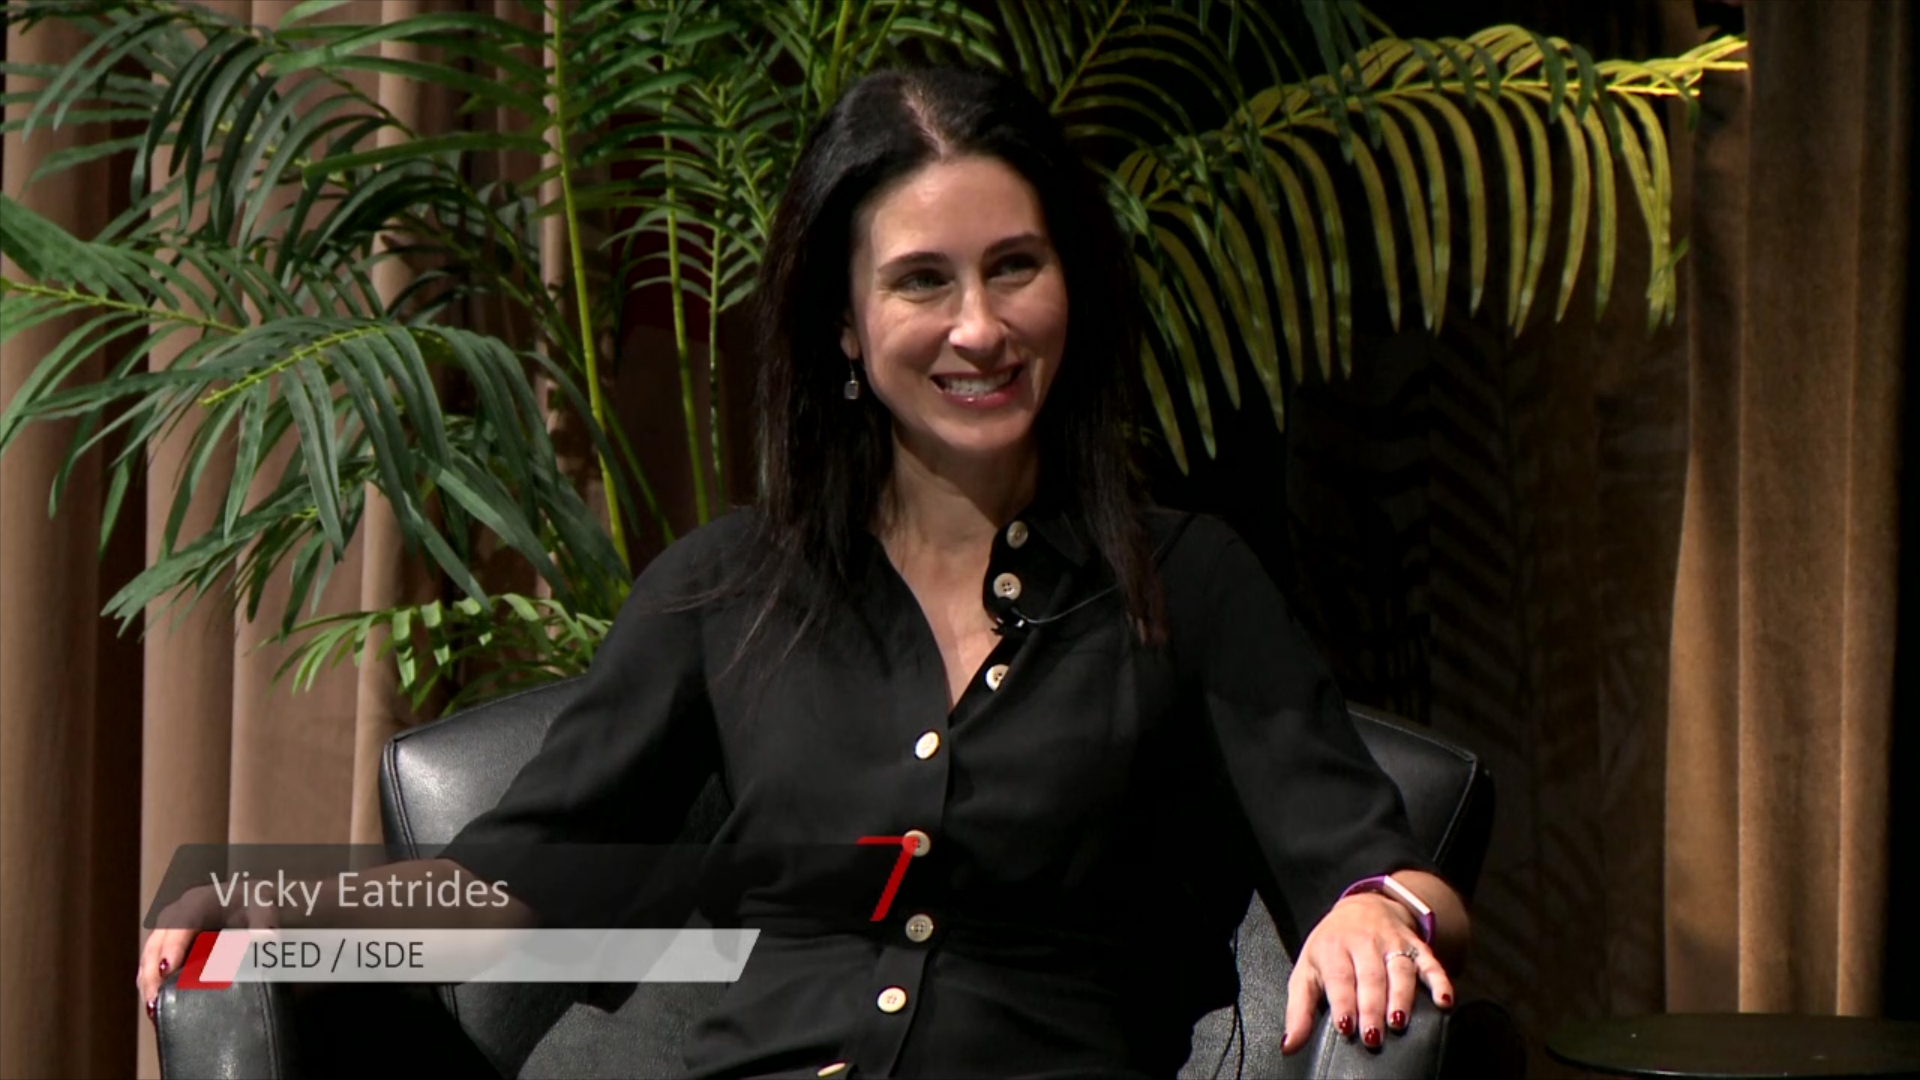 A woman, Vicky Eatrides, is seated in a black chair with green plants in the background